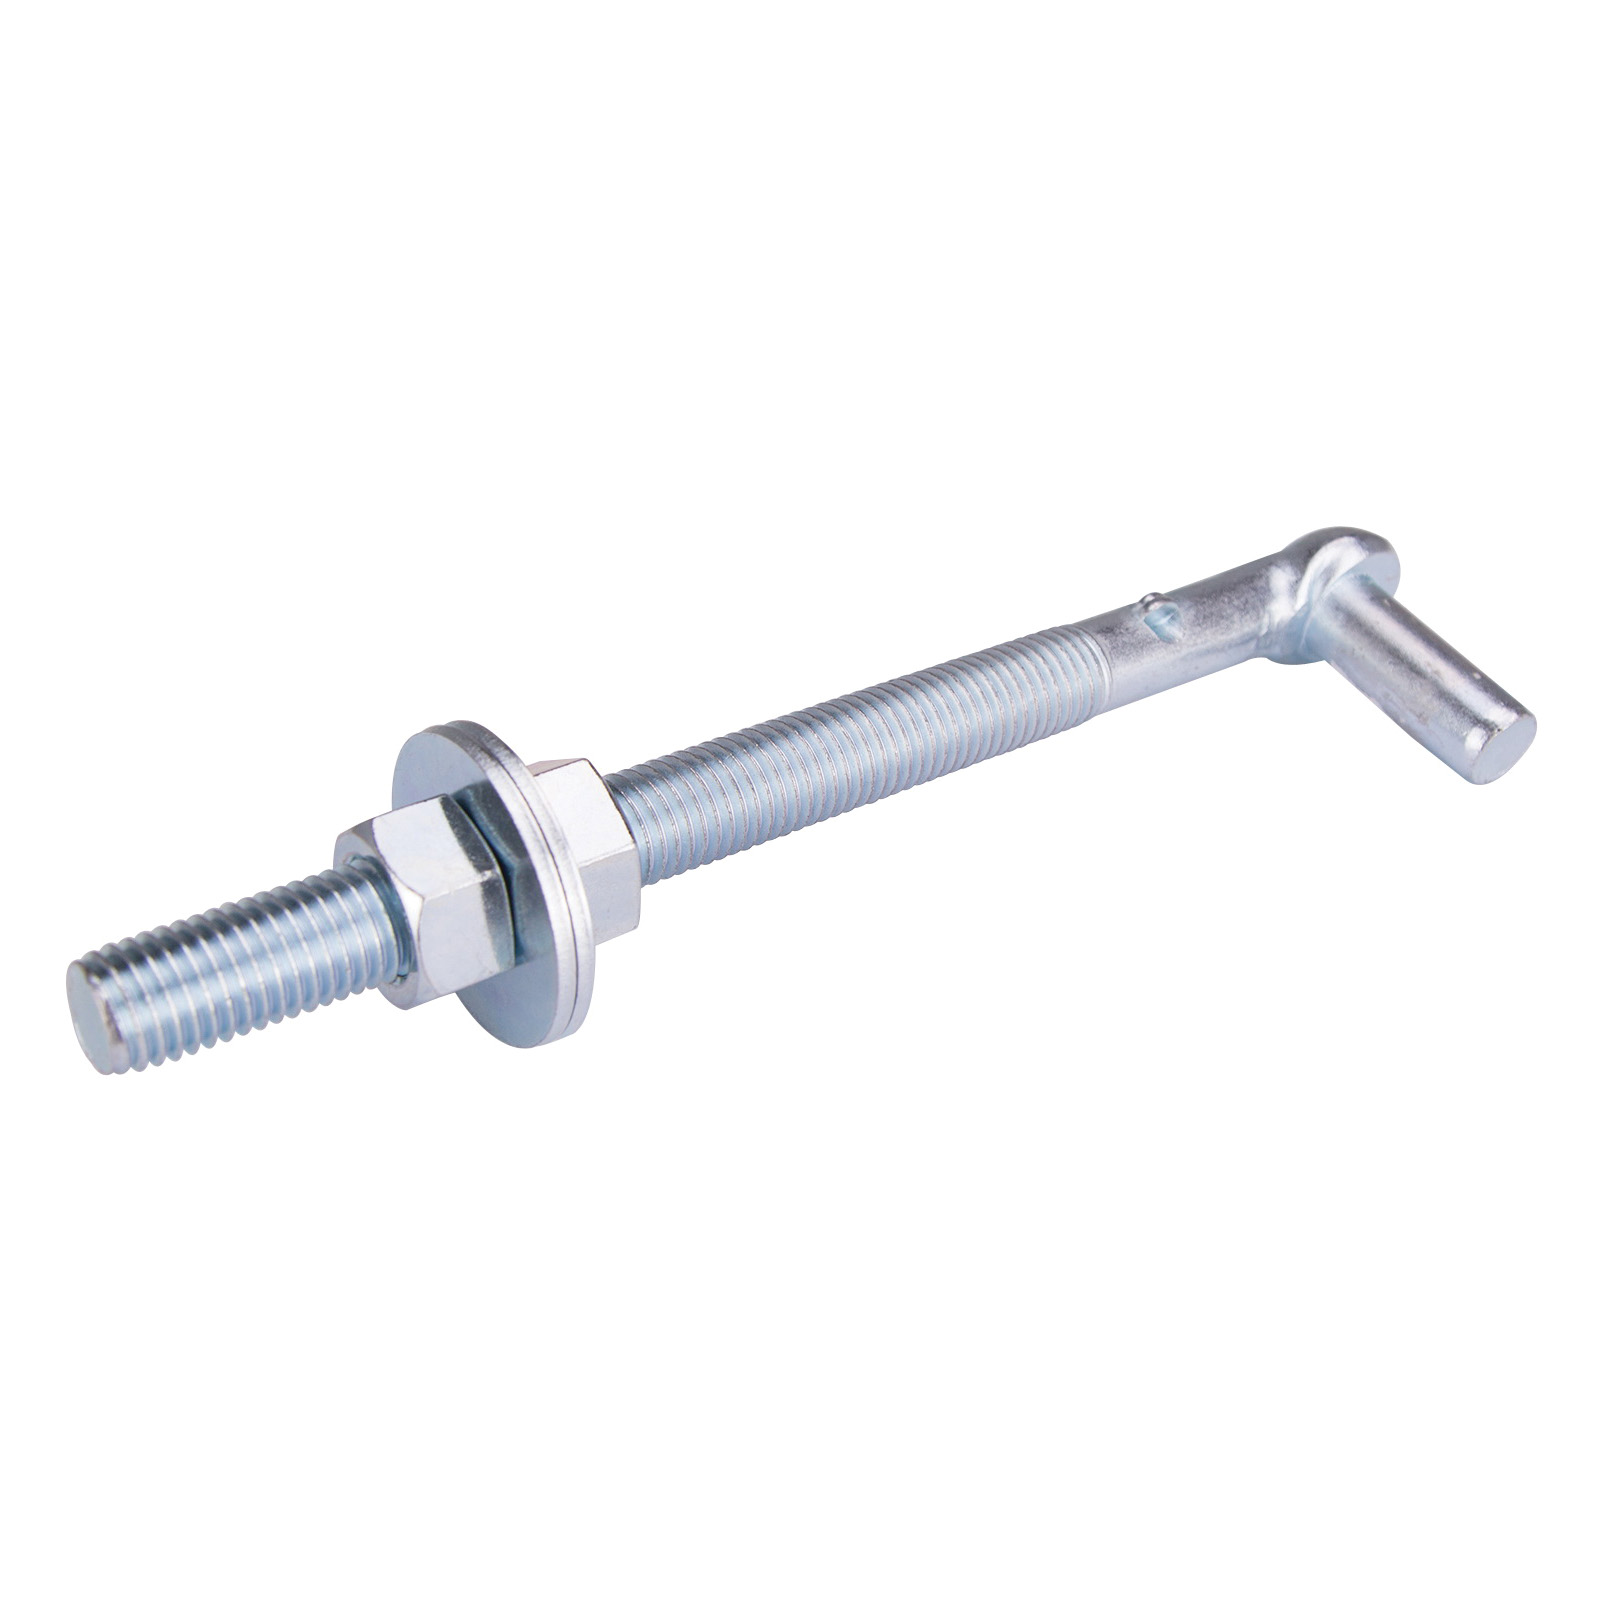 LR086 Bolt Hook, 3/4 in Thread, 7-1/8 in L Thread, 10 in L, Steel, Zinc-Plated